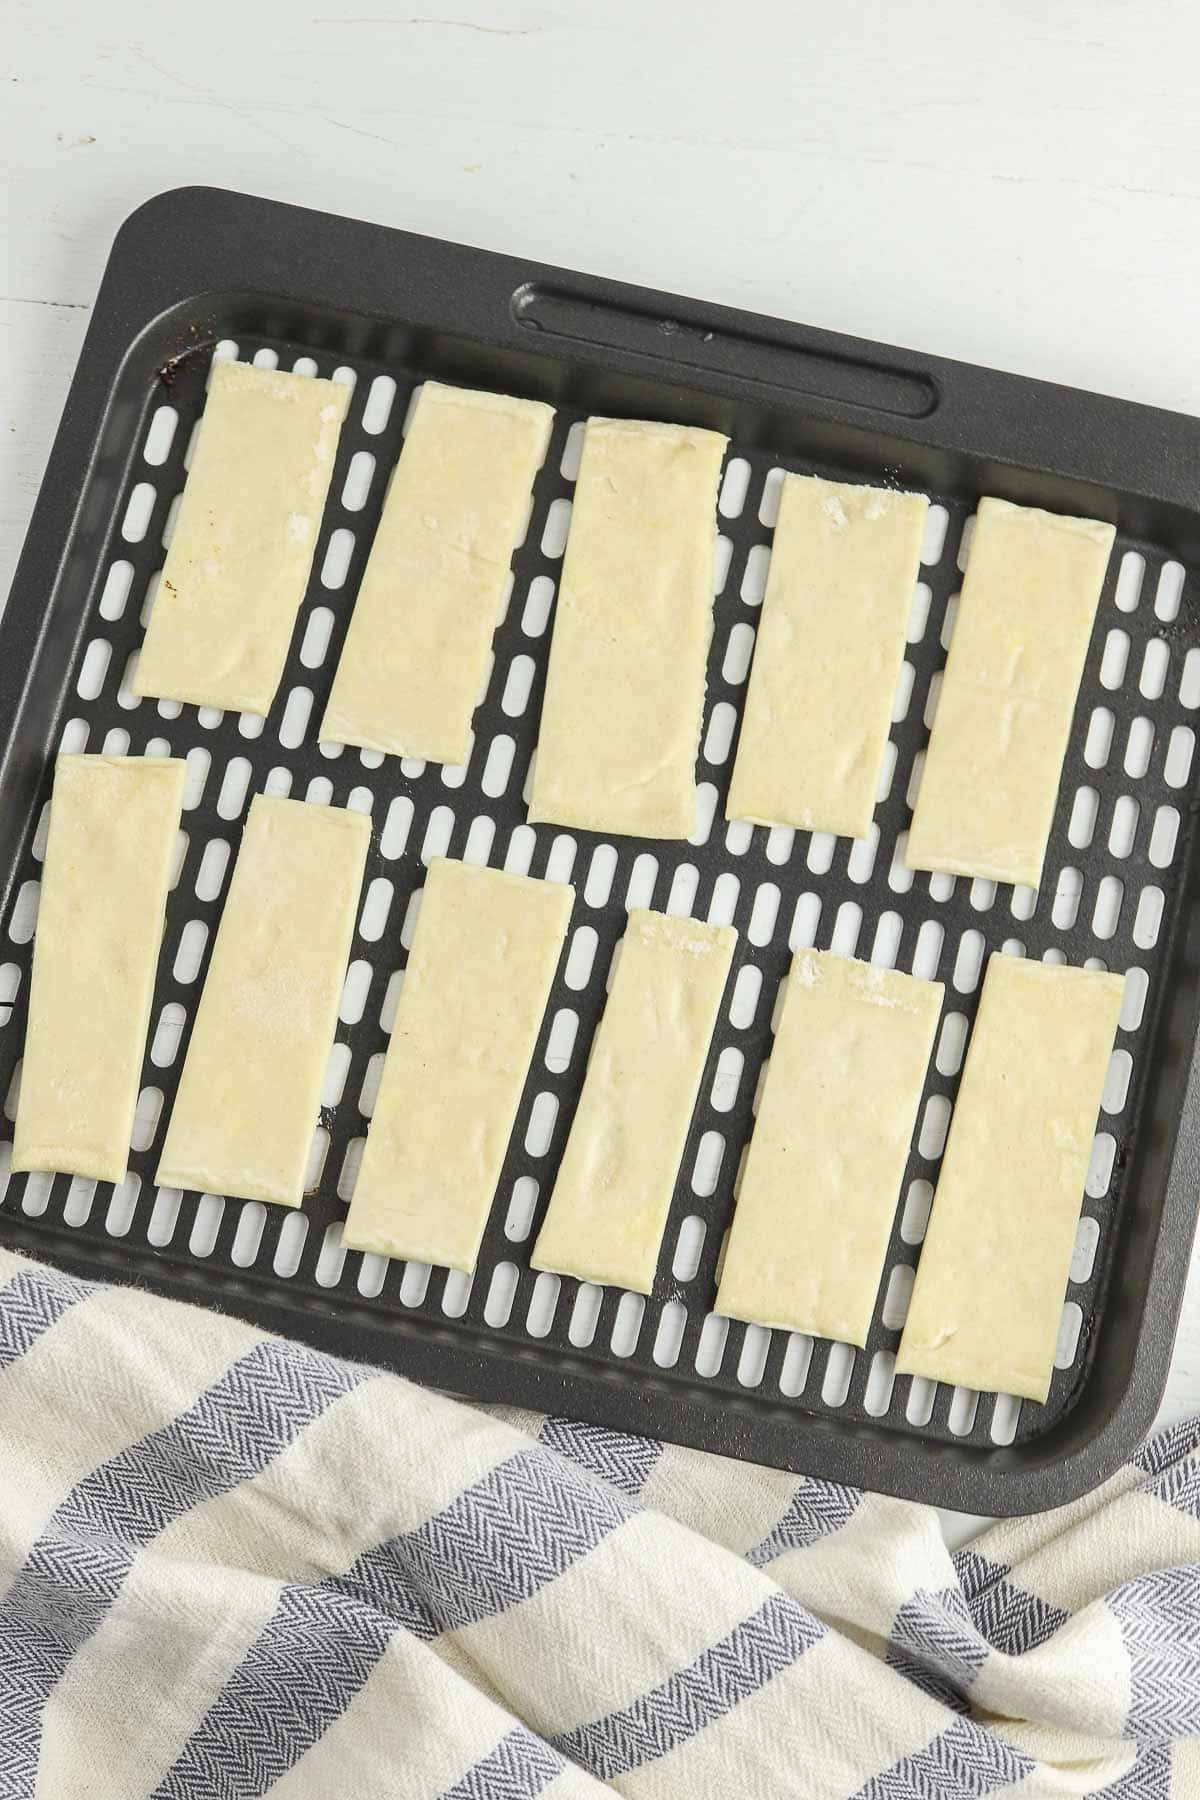 eleven strips of puff pastry dough in a black air fryer basket.